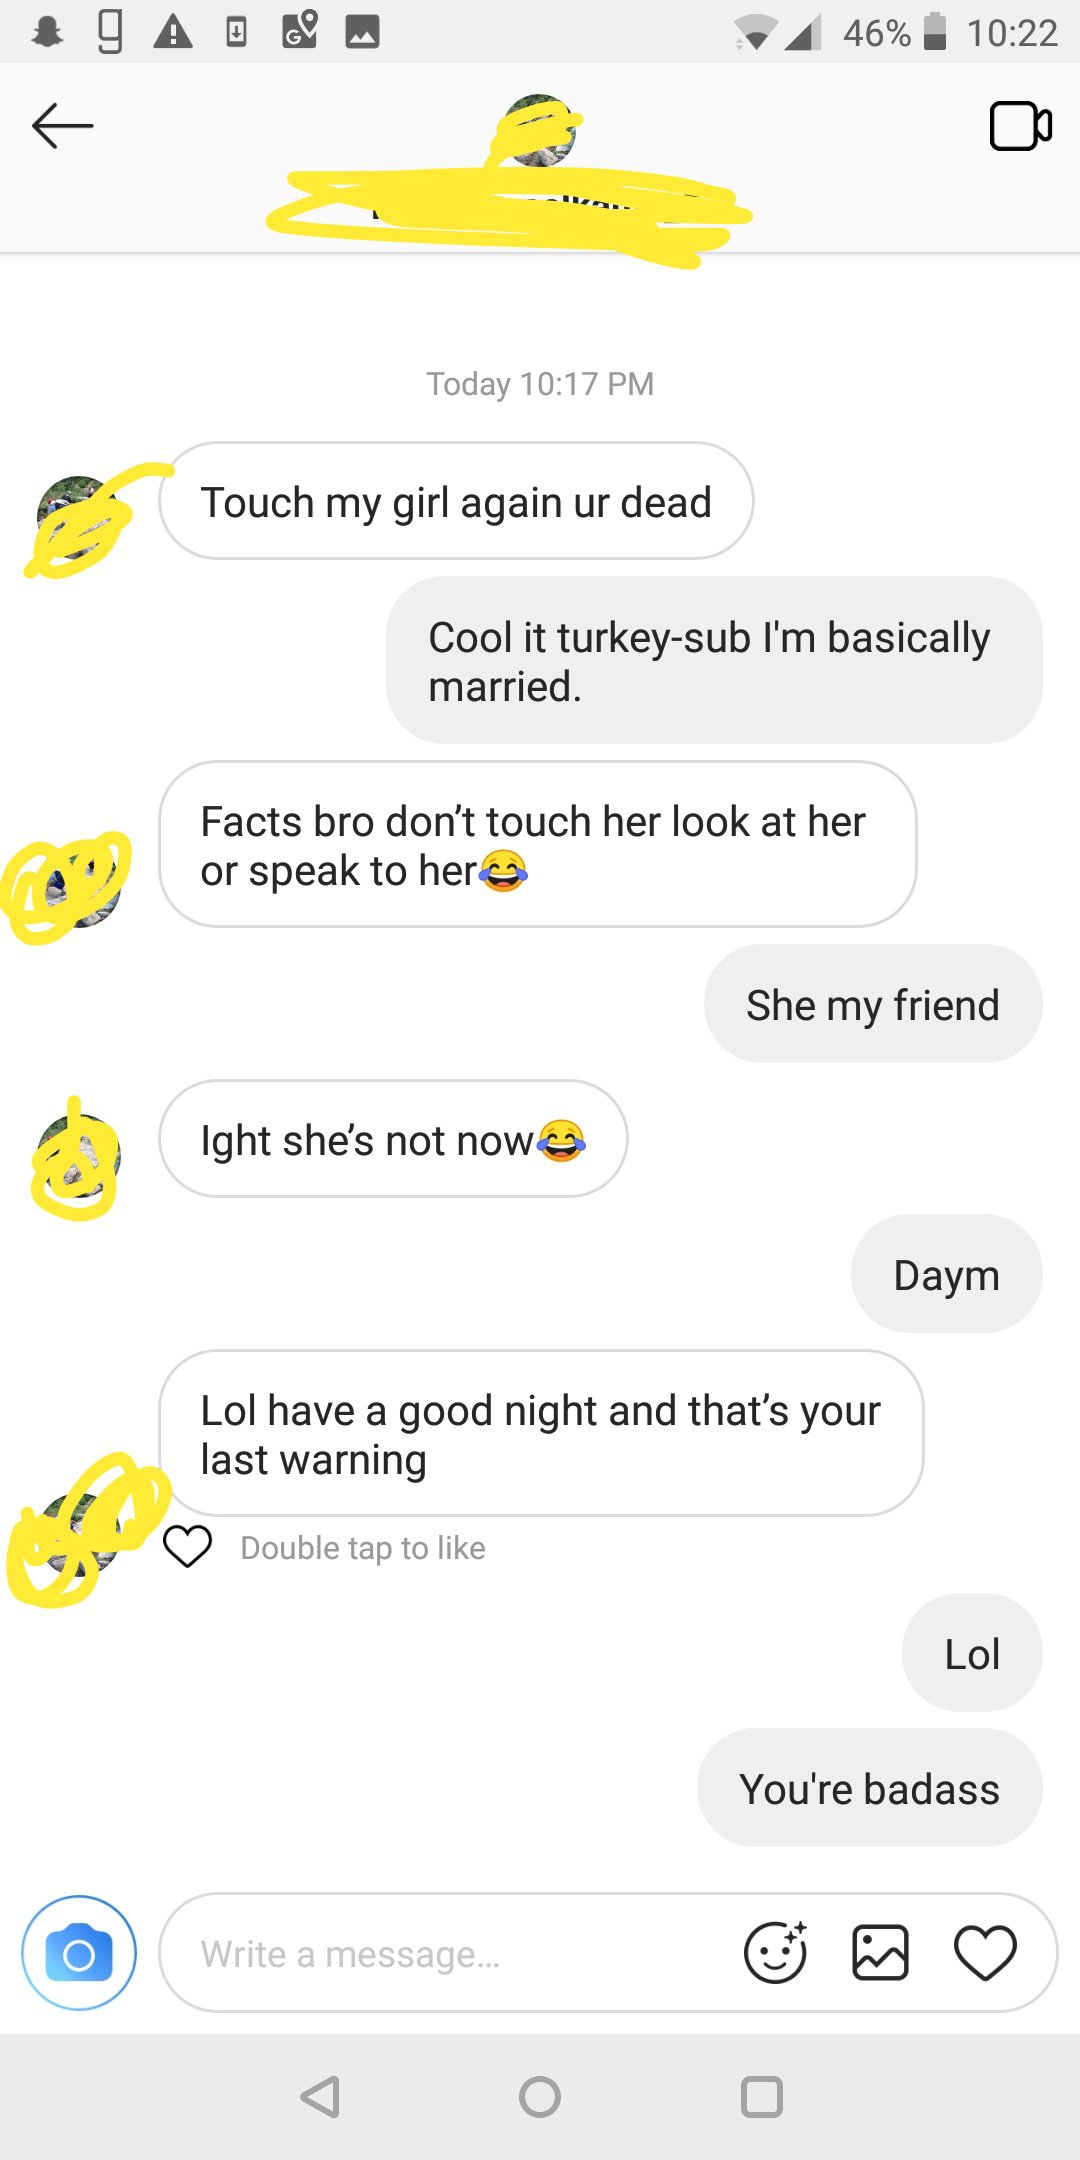 instagram 10 facts about me - O A 46% | Today Touch my girl again ur dead Cool it turkeysub I'm basically married. Facts bro don't touch her look at her or speak to her She my friend Ight she's not now Daym Lol have a good night and that's your last warni